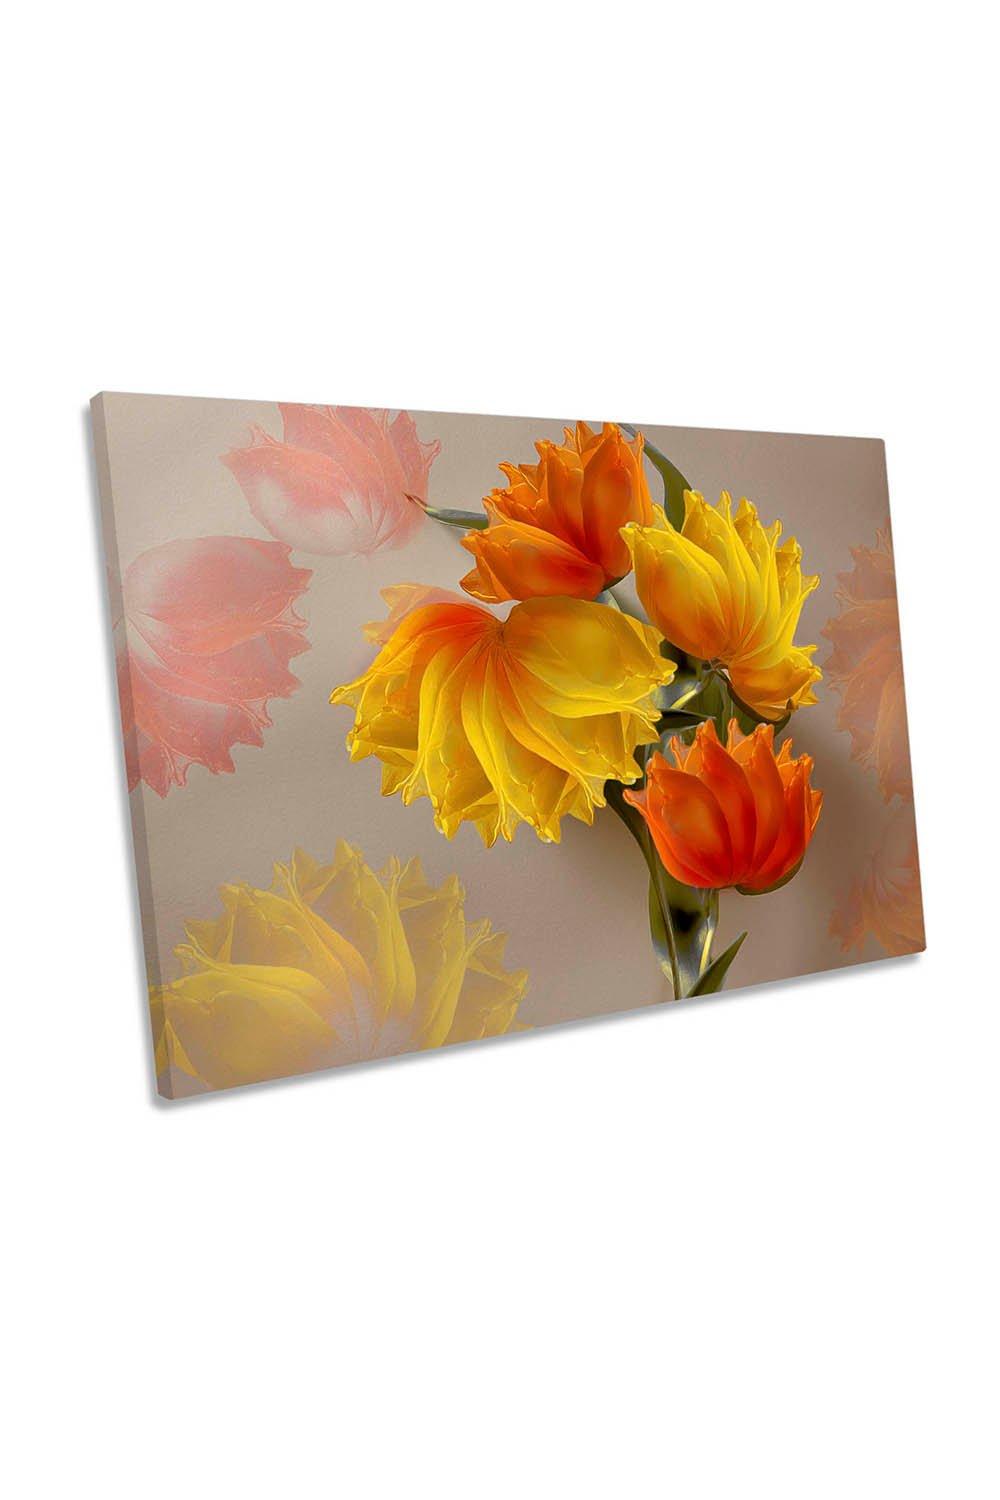 Four Tulips Floral Flowers Canvas Wall Art Picture Print